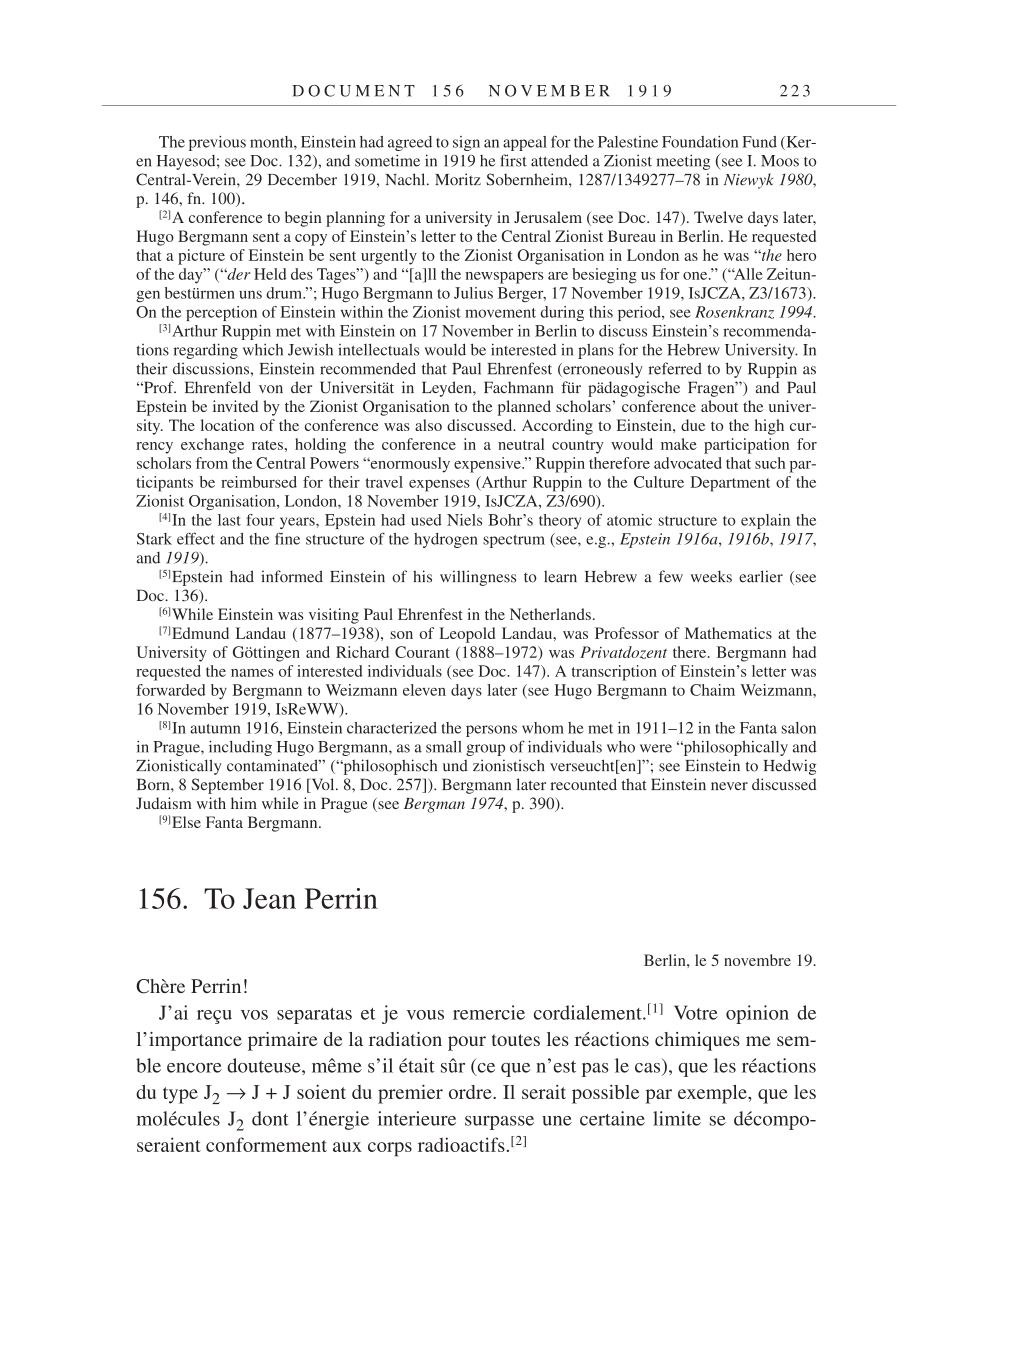 Volume 9: The Berlin Years: Correspondence January 1919-April 1920 page 223